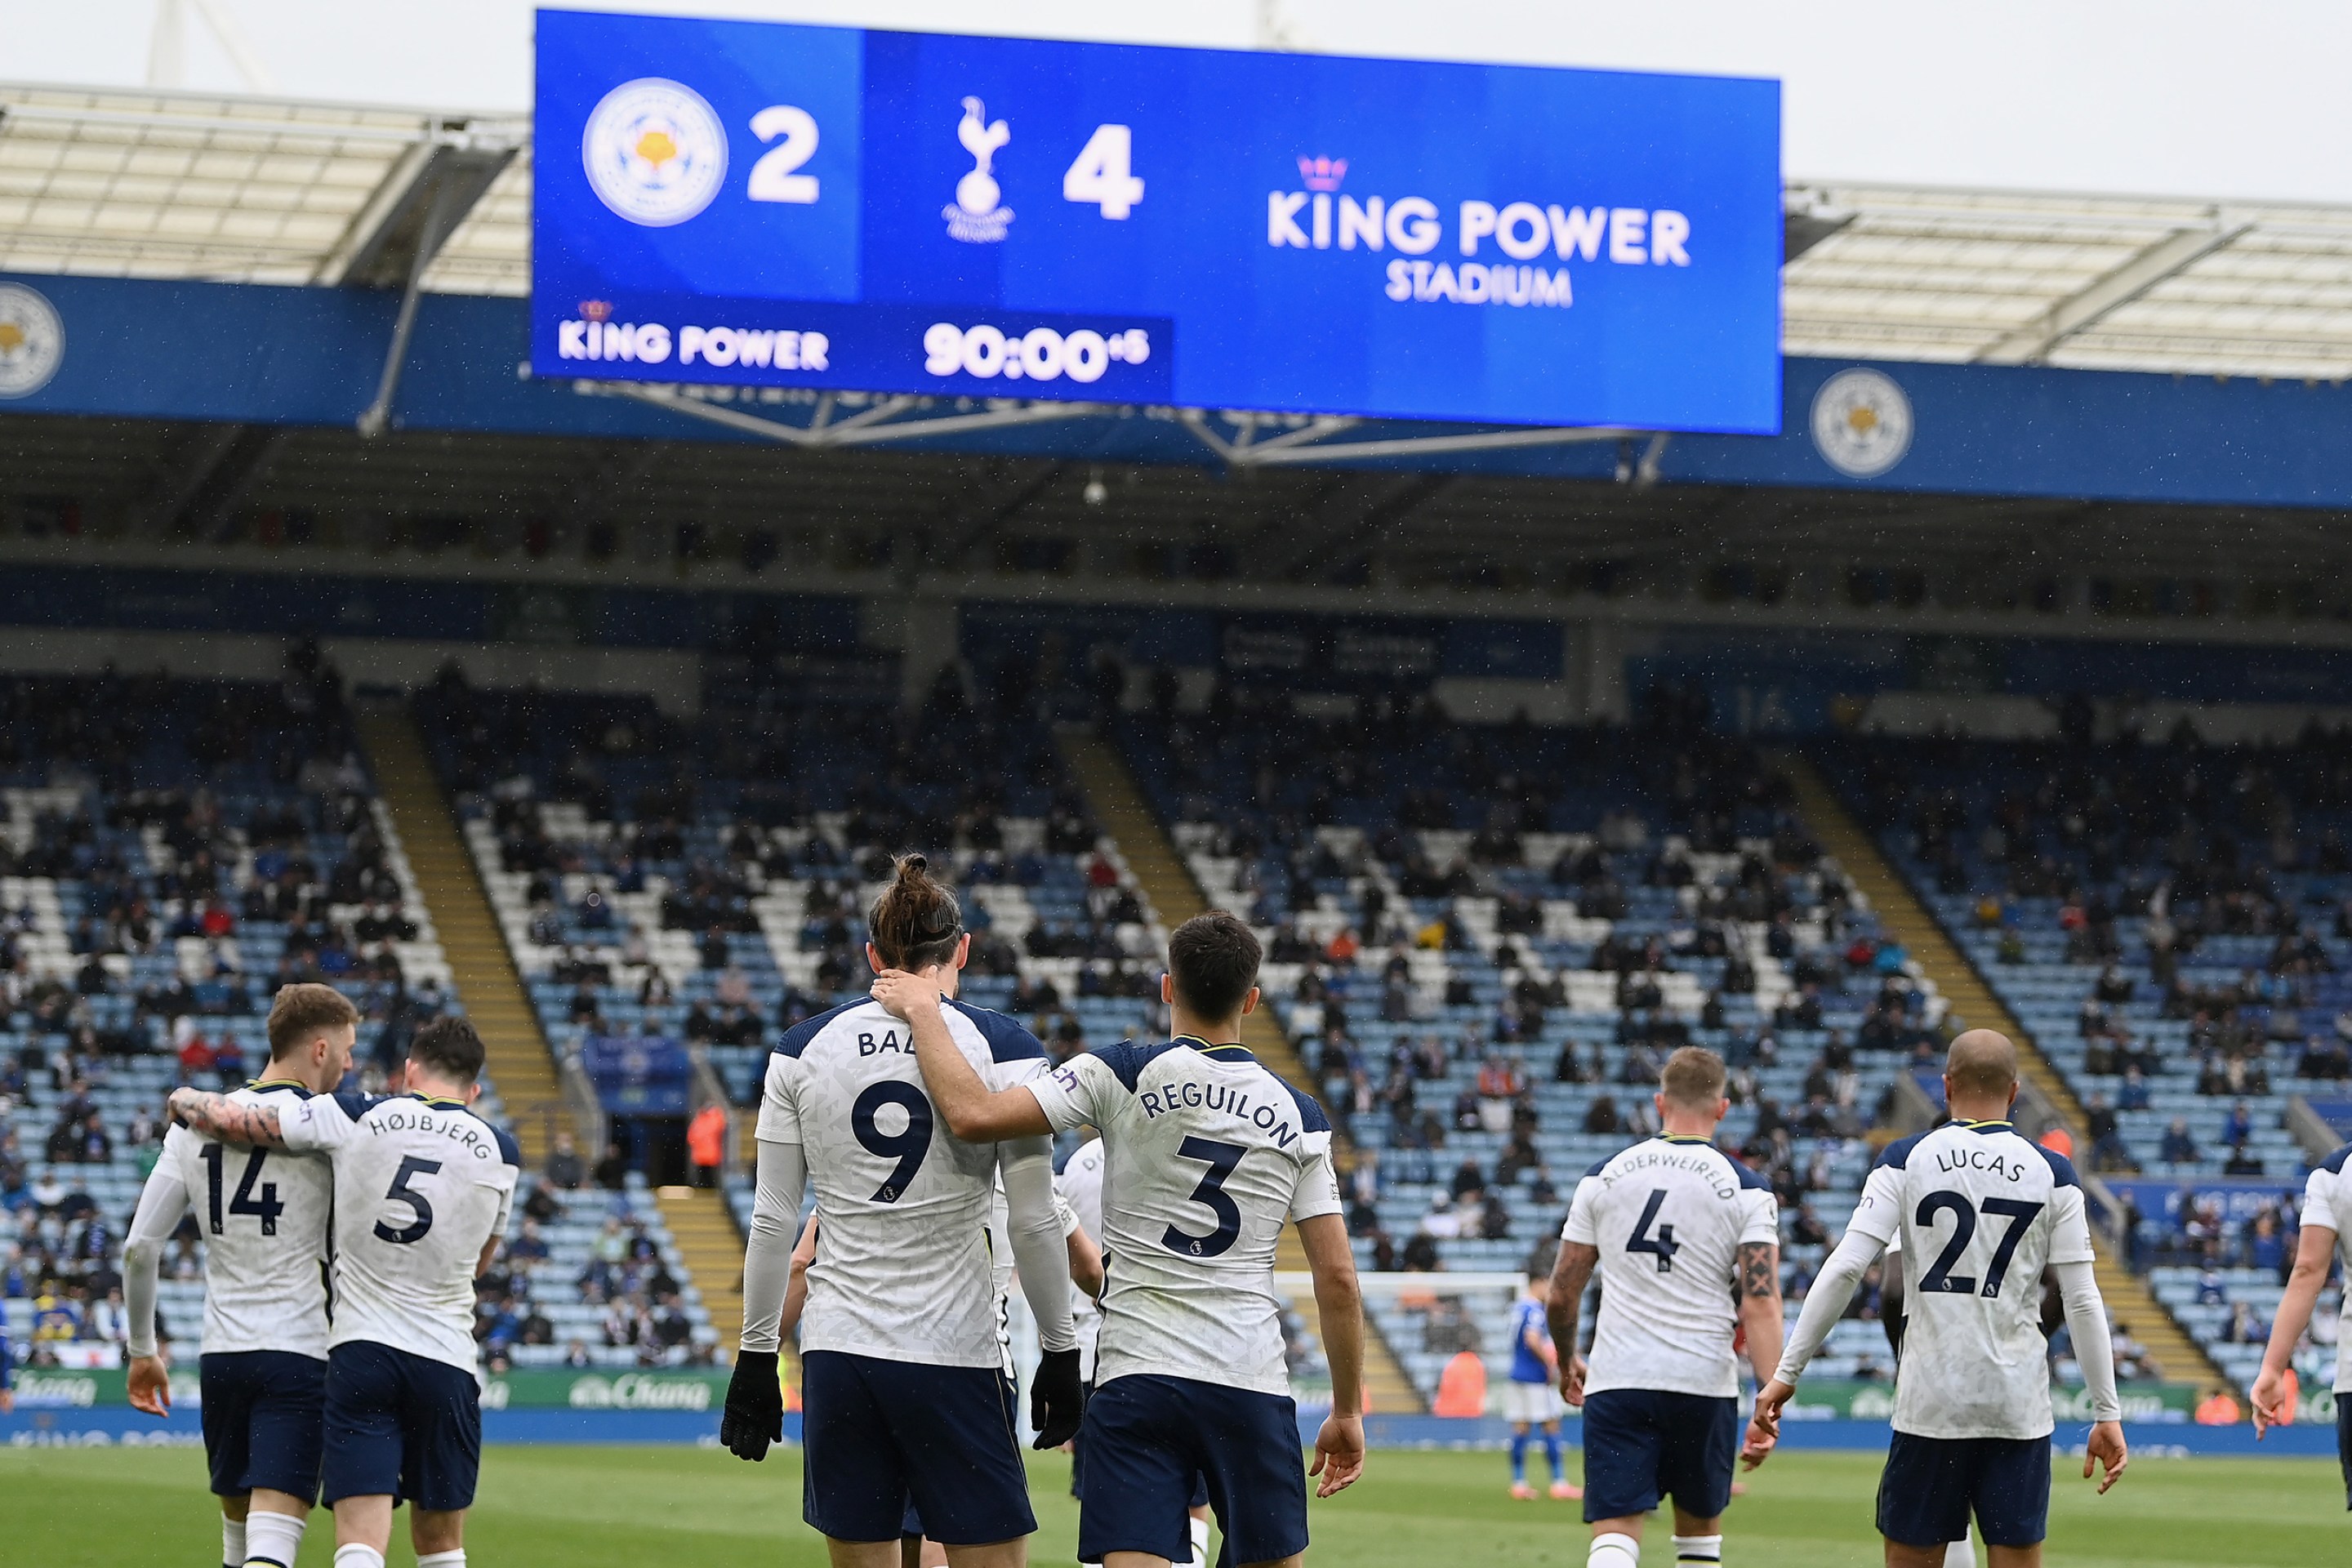 Gareth Bale of Tottenham Hotspur celebrates with teammate Sergio Reguilon after scoring his team's fourth goal during the Premier League match between Leicester City and Tottenham Hotspur at The King Power Stadium on May 23, 2021 in Leicester, England.